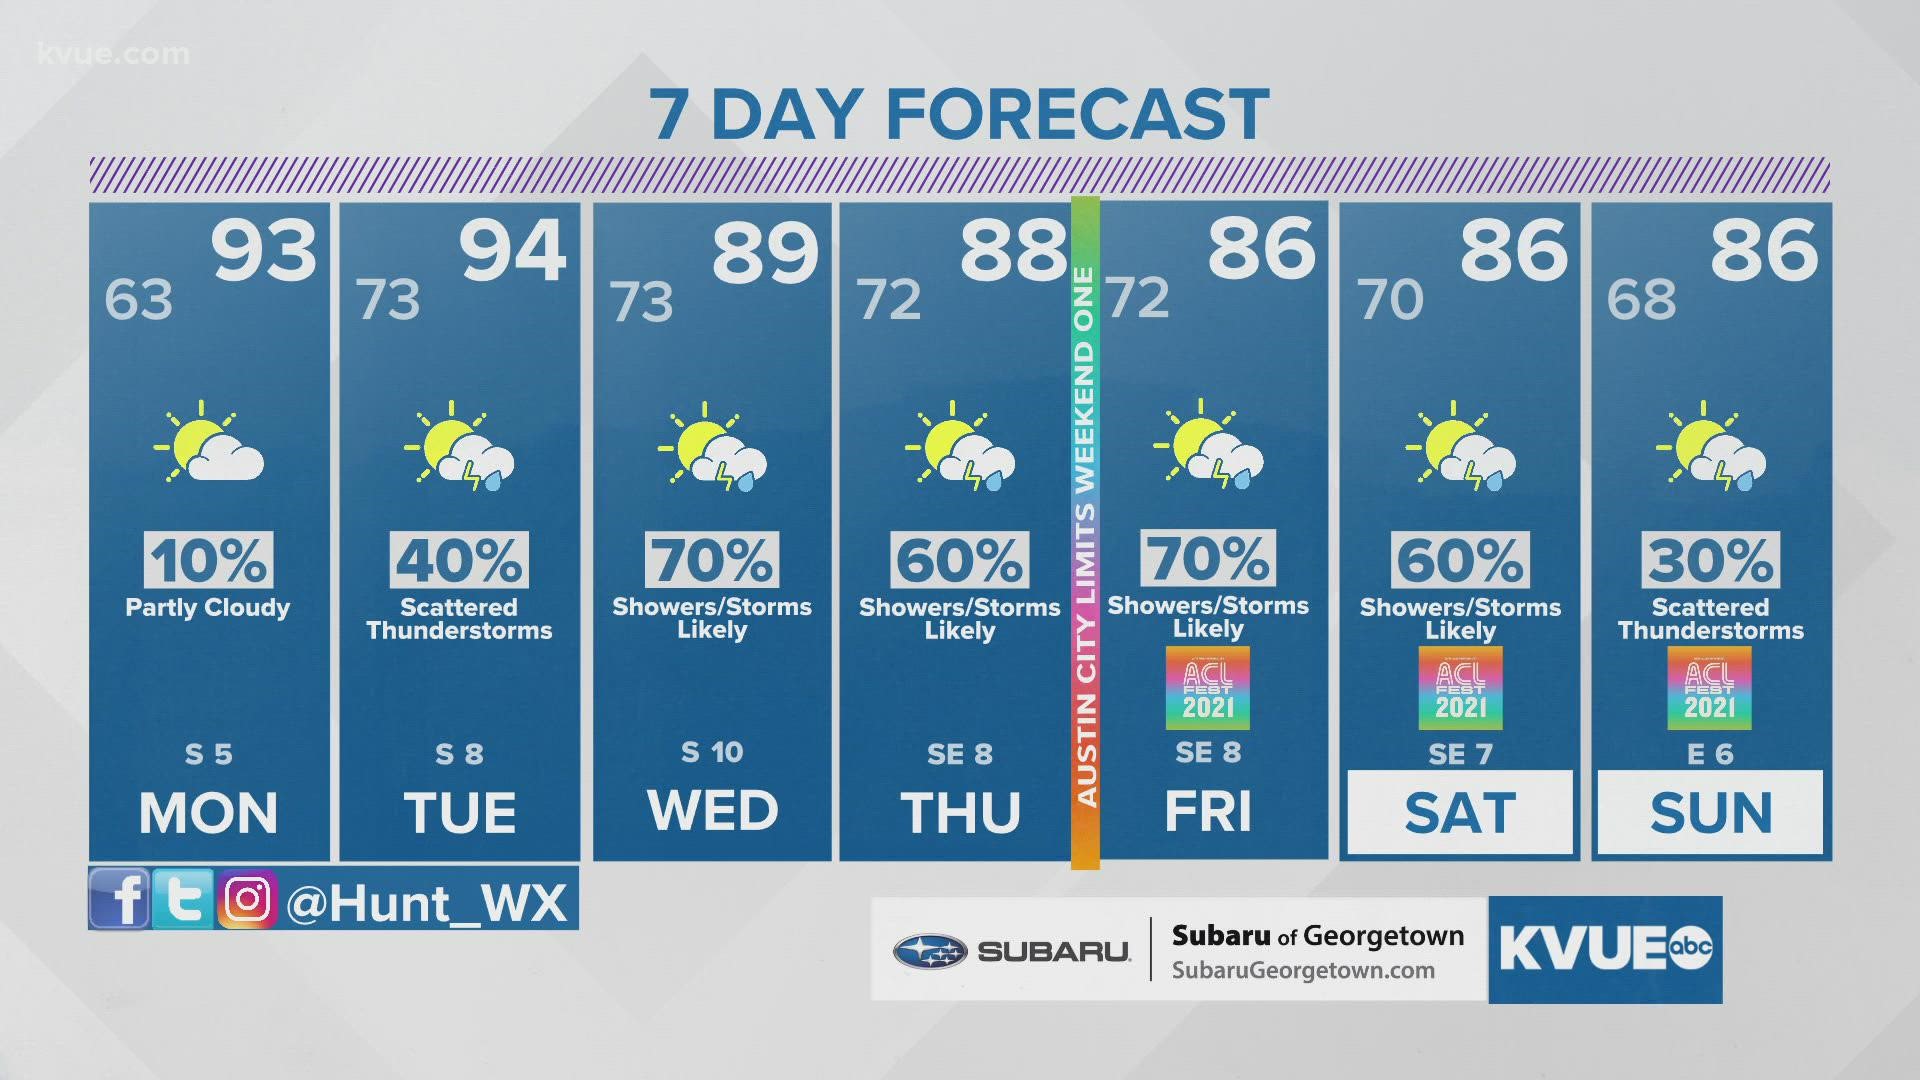 Higher rain chances for the upcoming week.